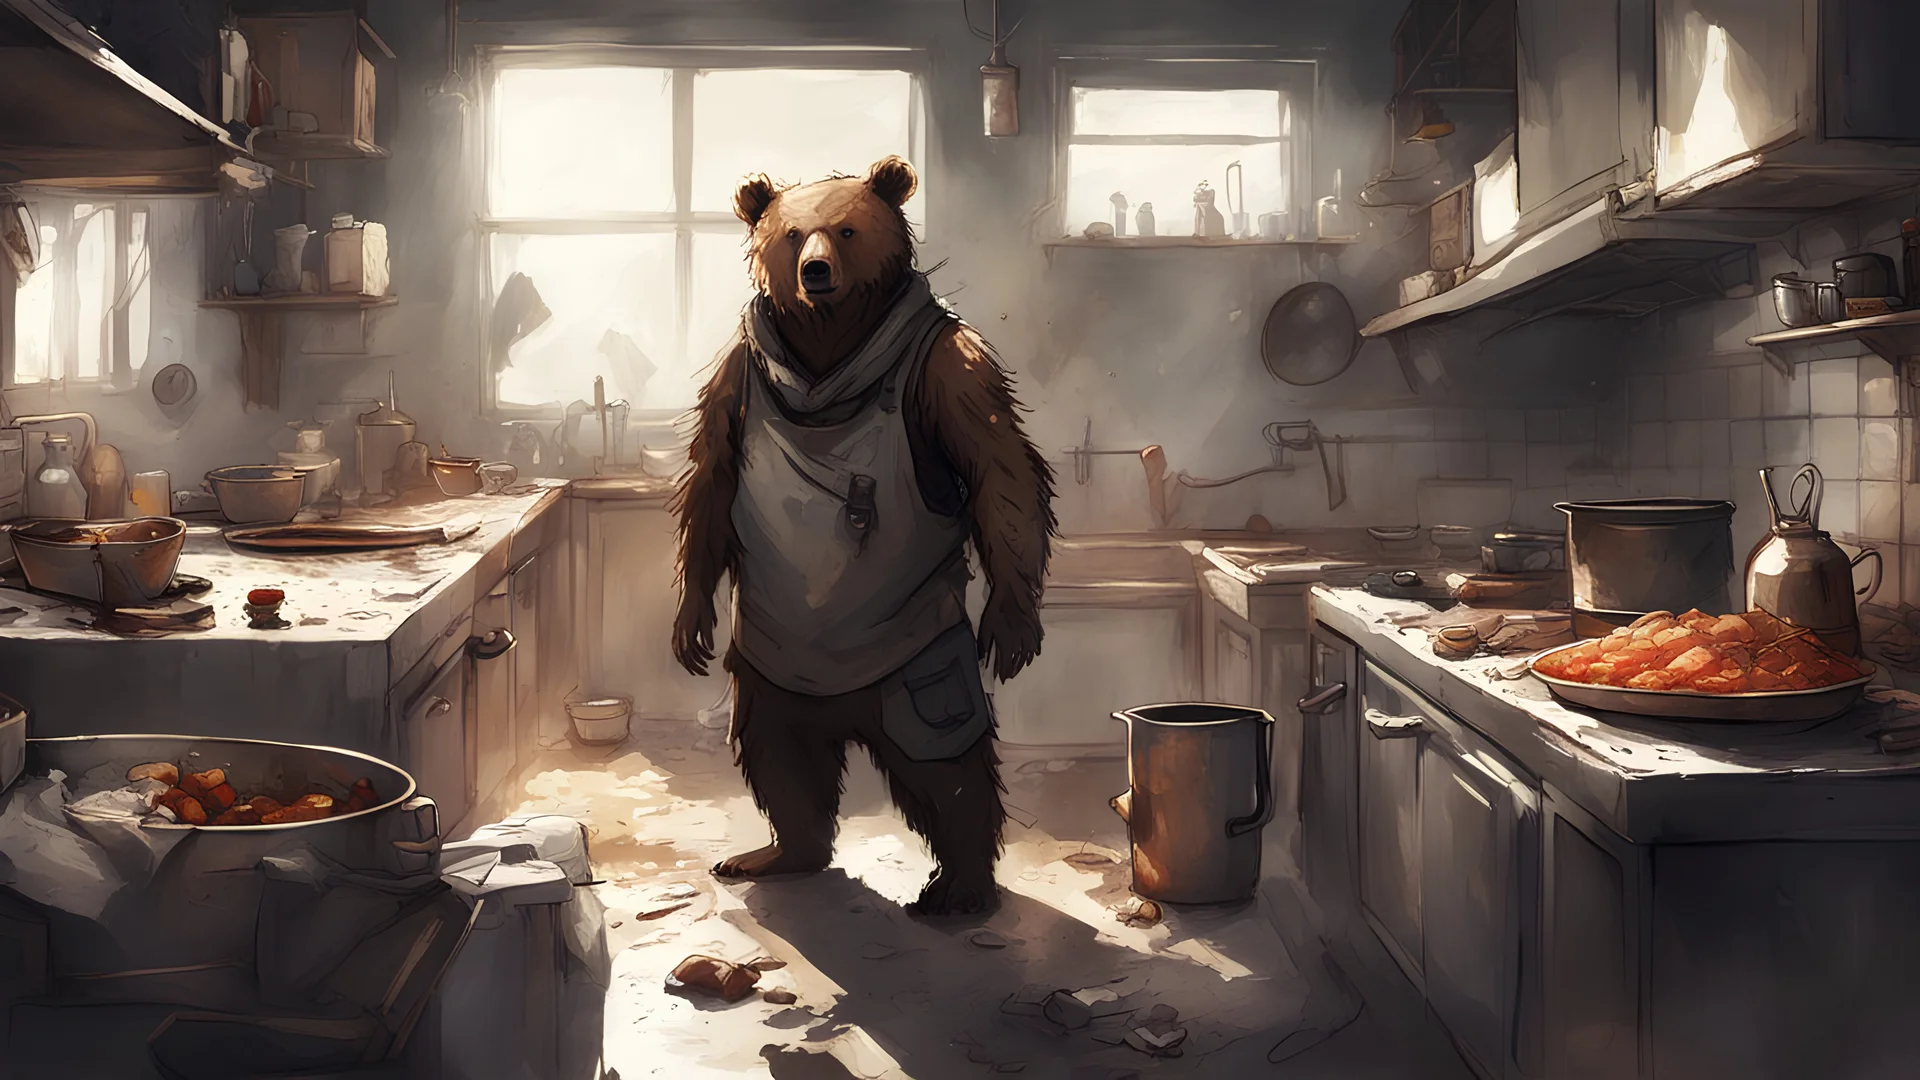 humanoid bear, scavenger, cooking, messy kitchen, post-apocalyptic, concept art